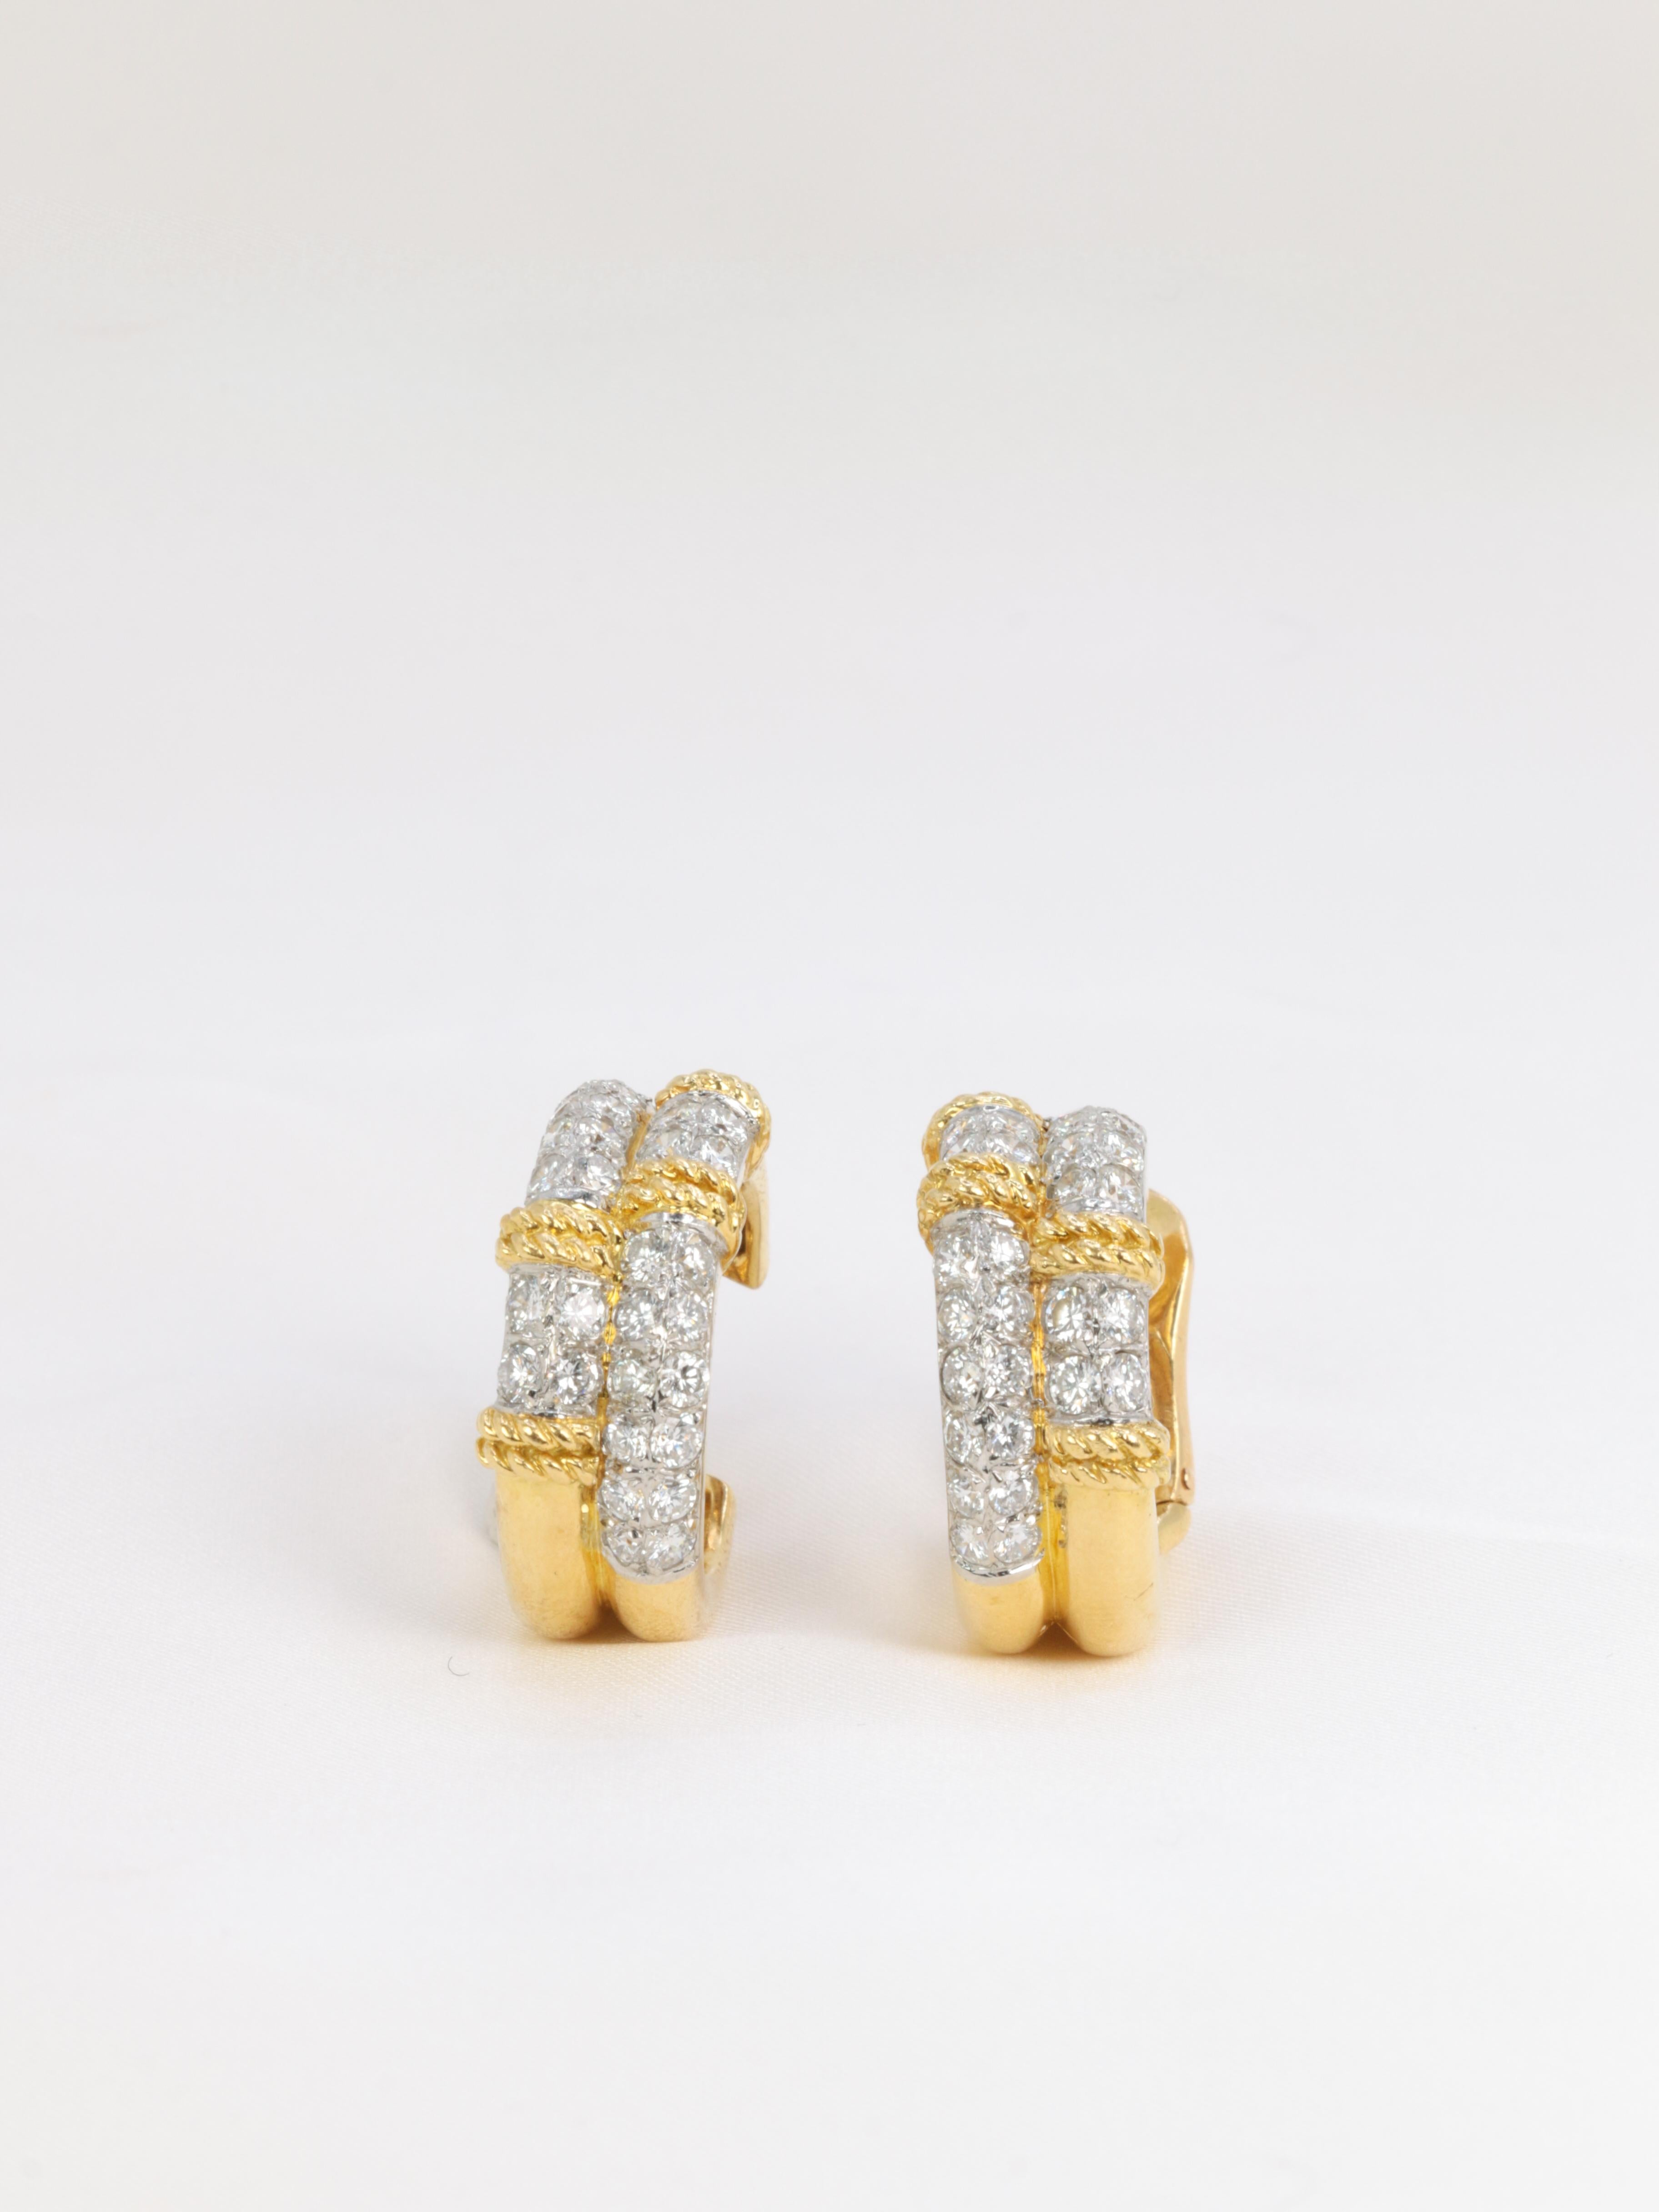 A pair of 18k (75°/°°) yellow gold and platinum creole ear clips formed of two rods each paved with two rows of diamonds and framed by two braided gold wires.
French work from the late 1980s. Signed Fred Paris
Presence of eagle head hallmark and